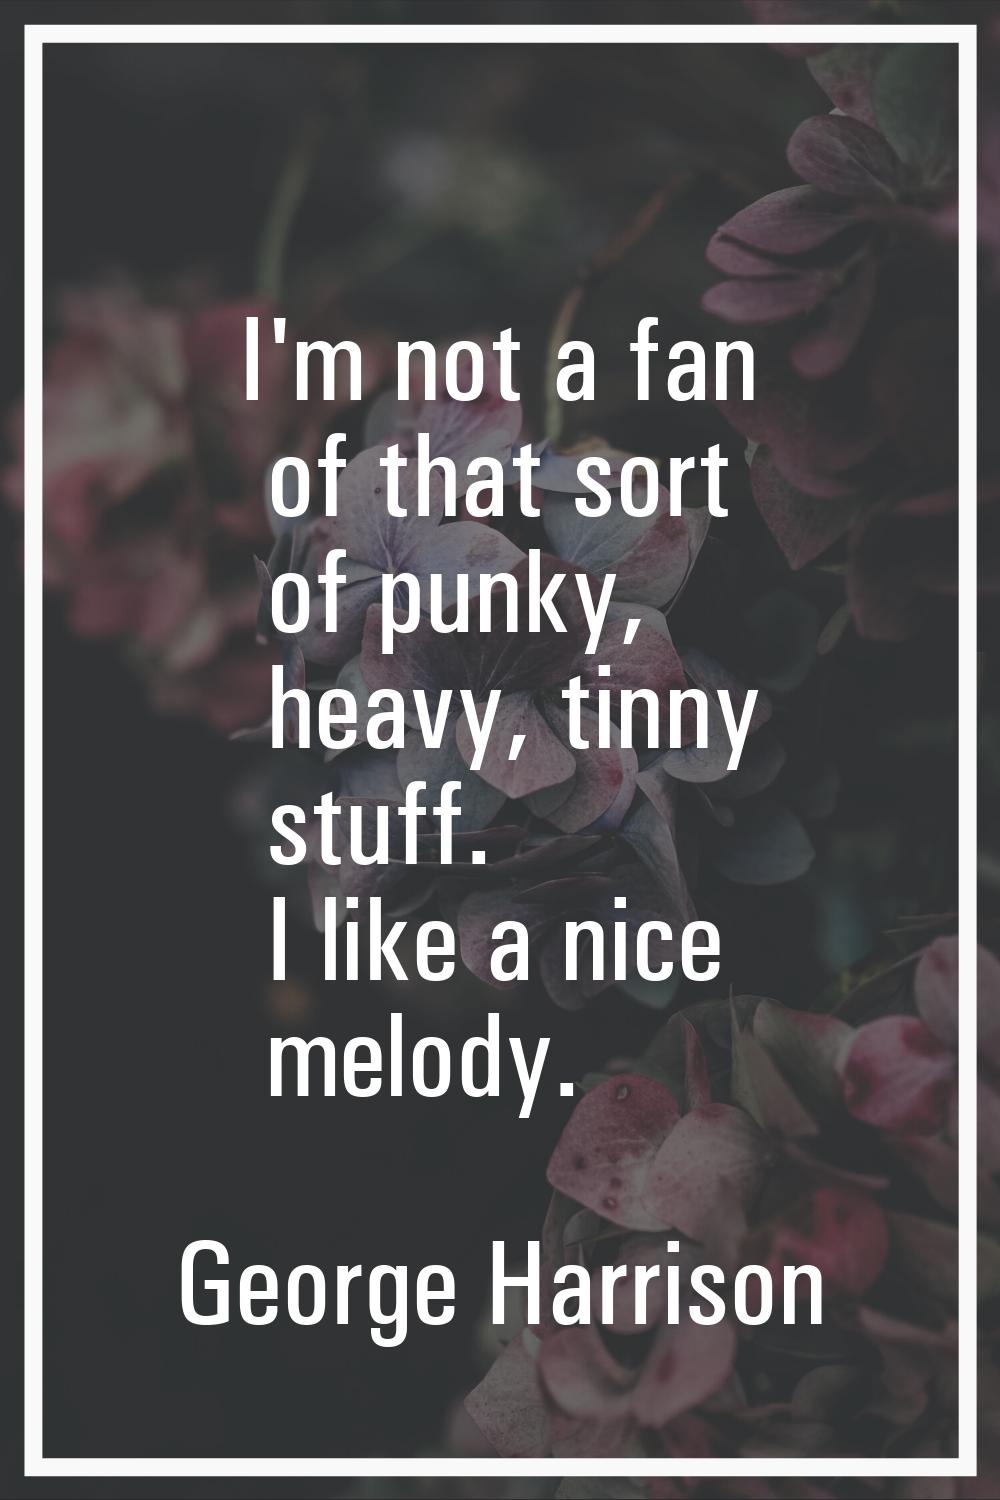 I'm not a fan of that sort of punky, heavy, tinny stuff. I like a nice melody.